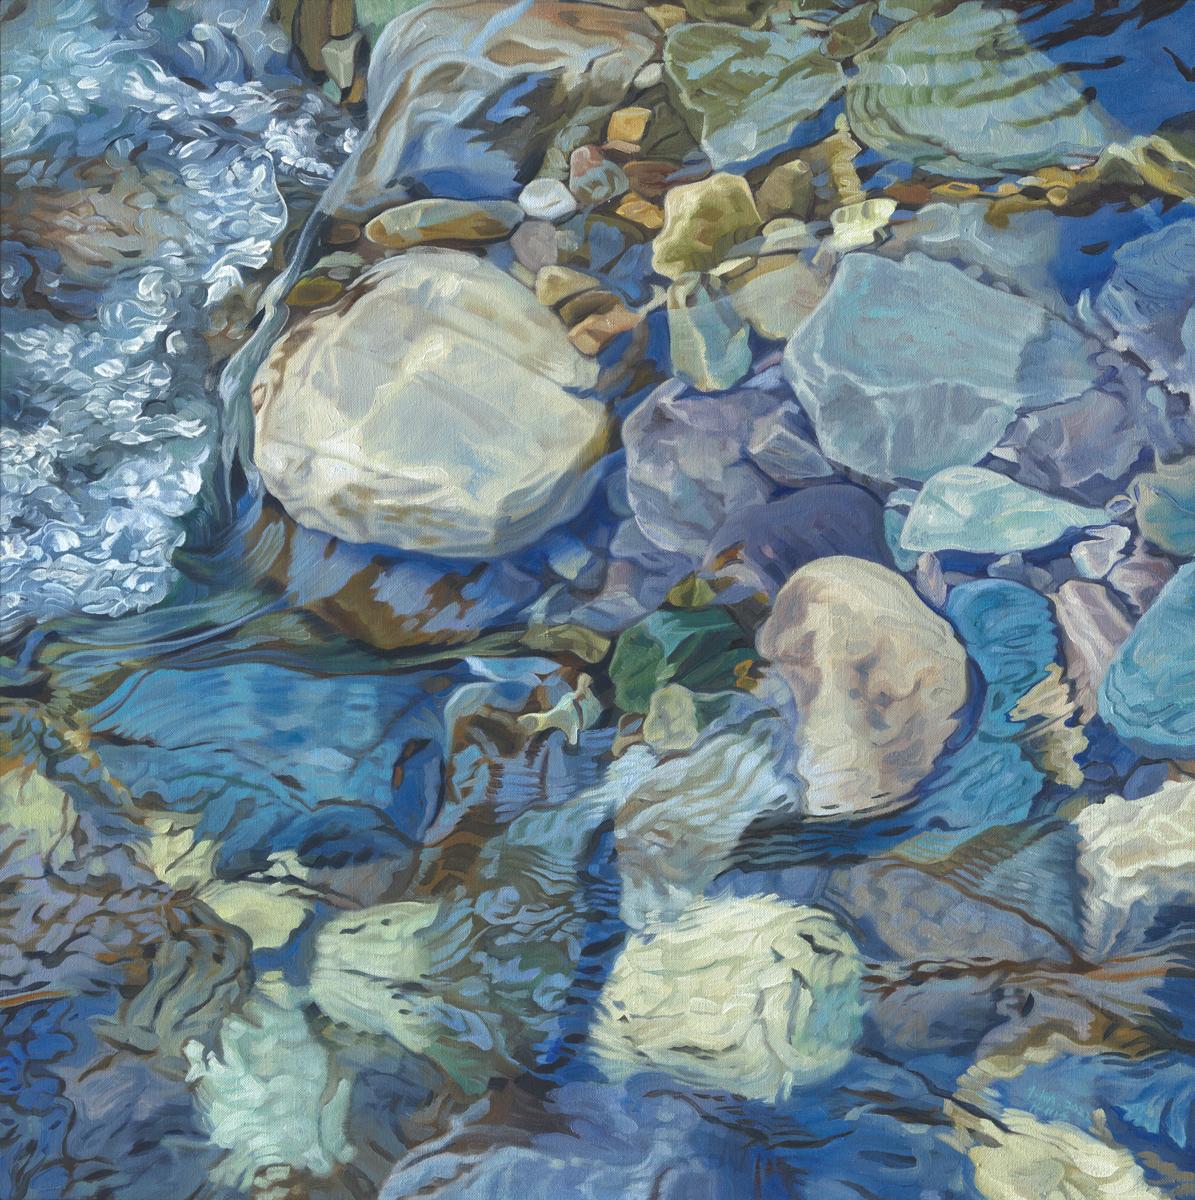 This realistic limited edition print by John Harris captures a highly detailed, cropped view of water lightly rippling over river rocks in a cool blue palette. 

This Limited Edition giclee print is an edition size of 100. Printed on canvas, this